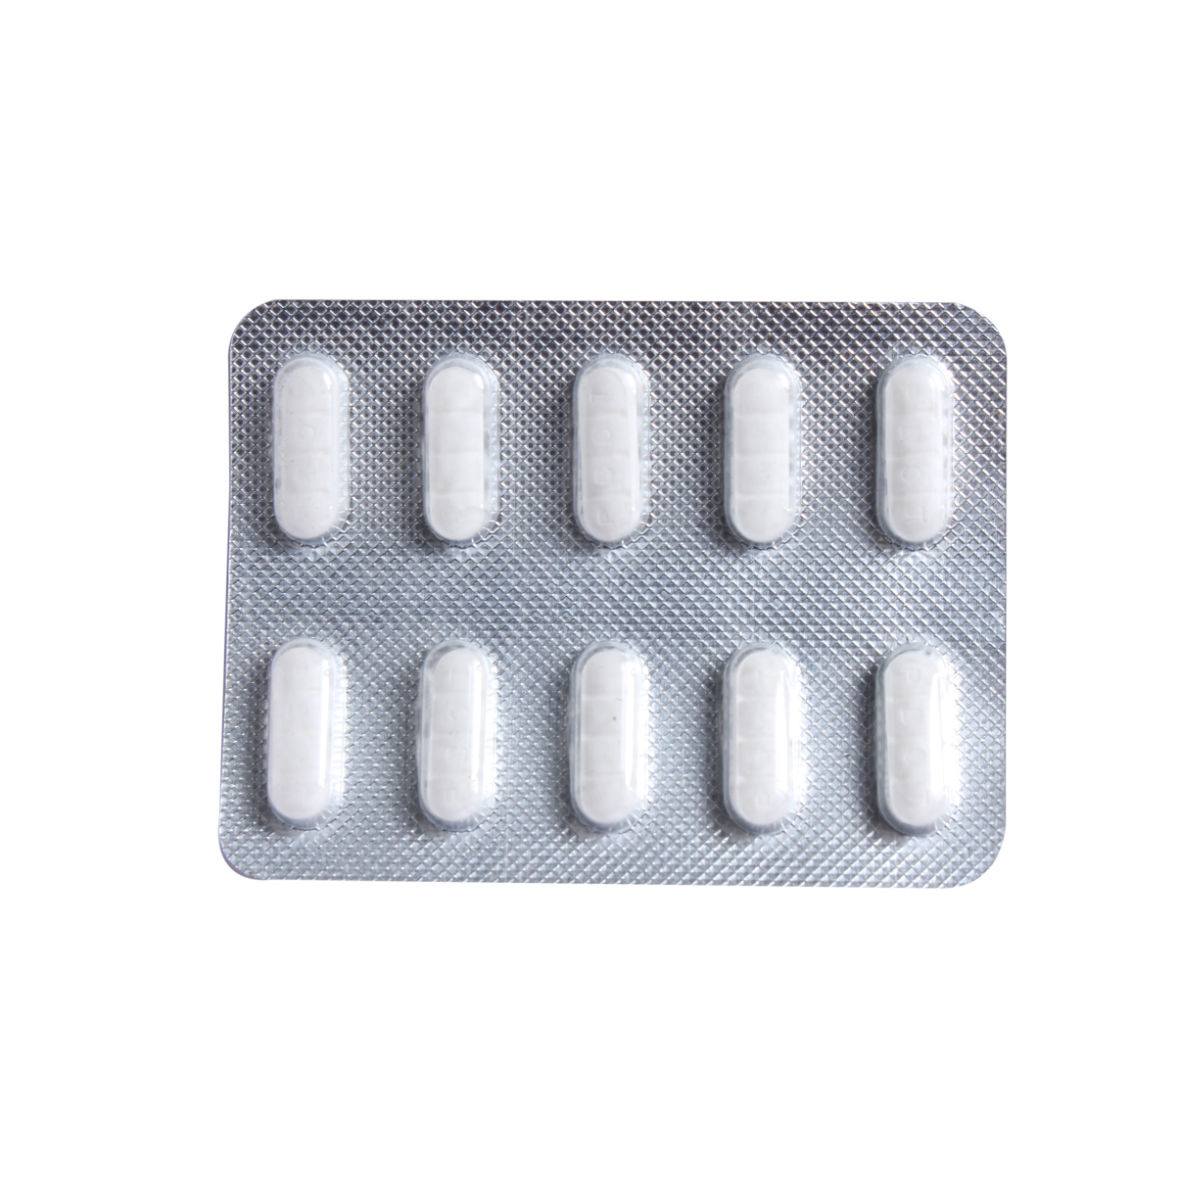 Buy Frisium 20 mg Tablet 10's Online